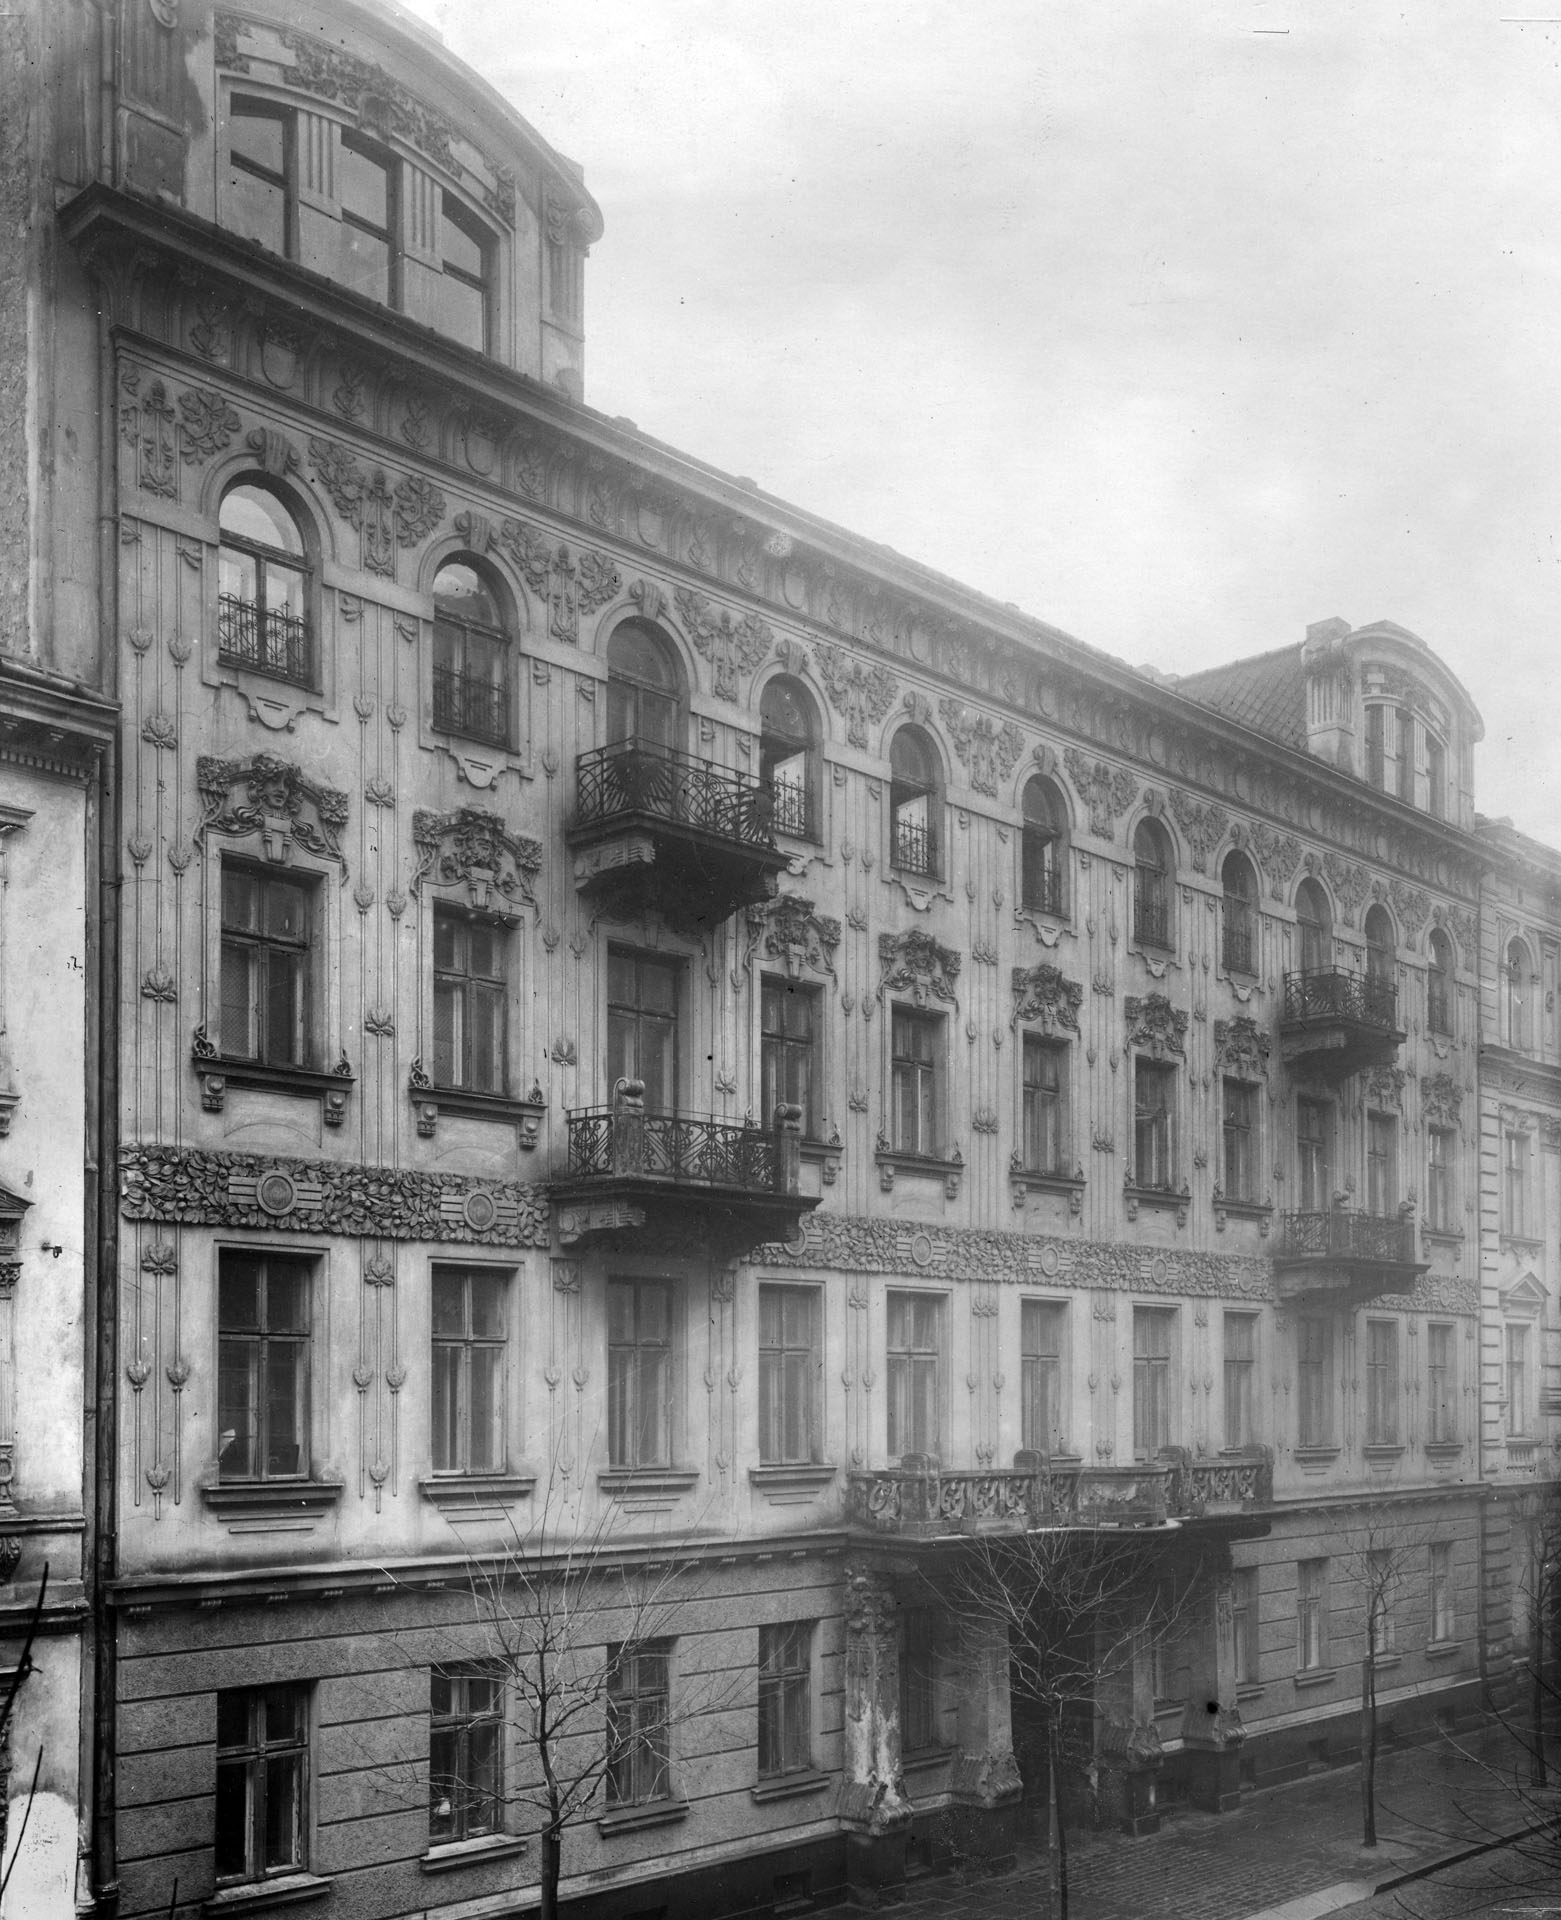 The building at Poznańska street before the reconstruction